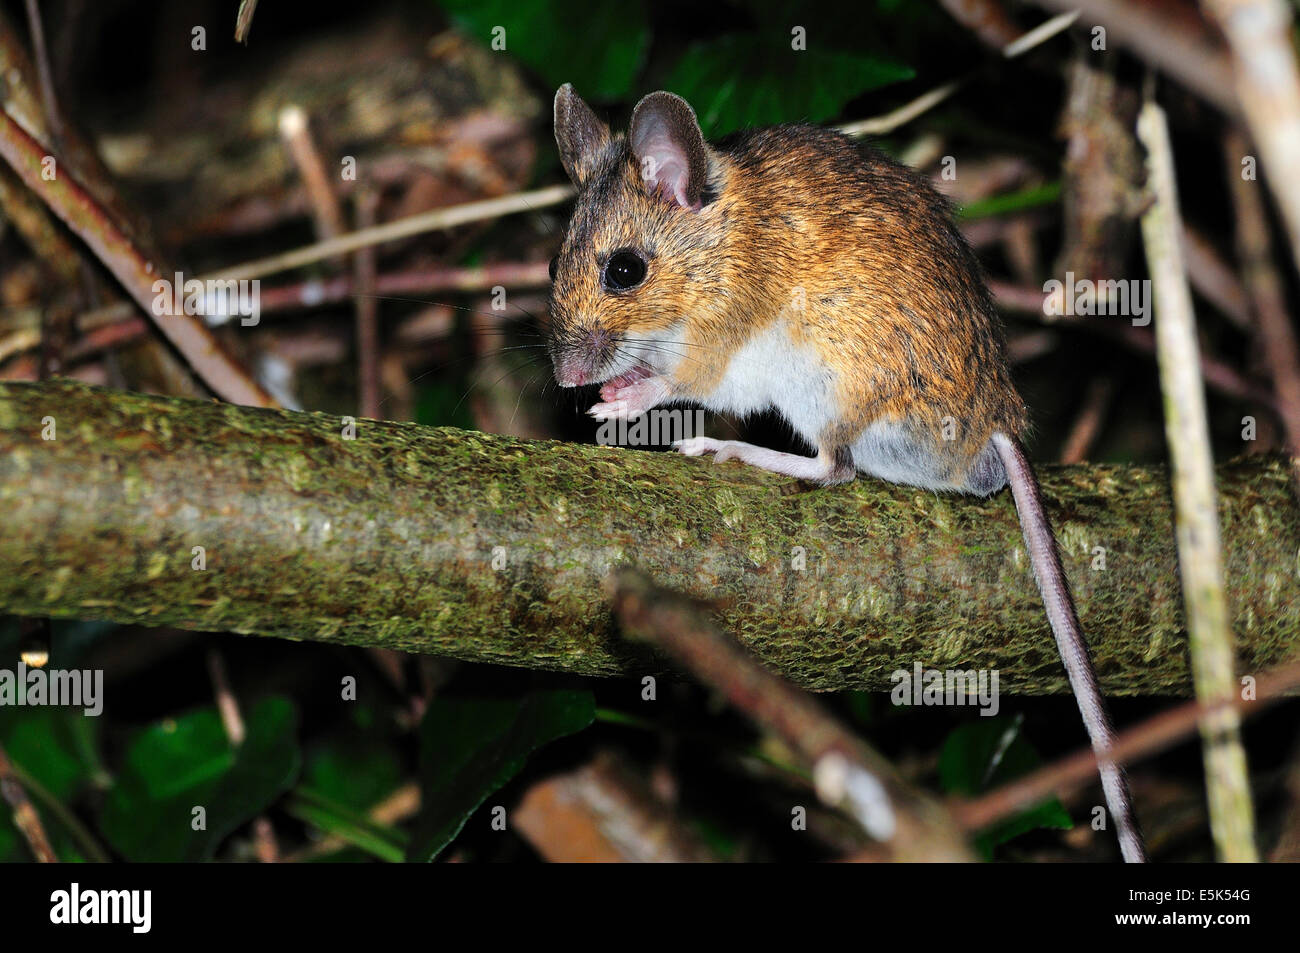 One woodmouse sitting on a branch in a hedge UK Stock Photo